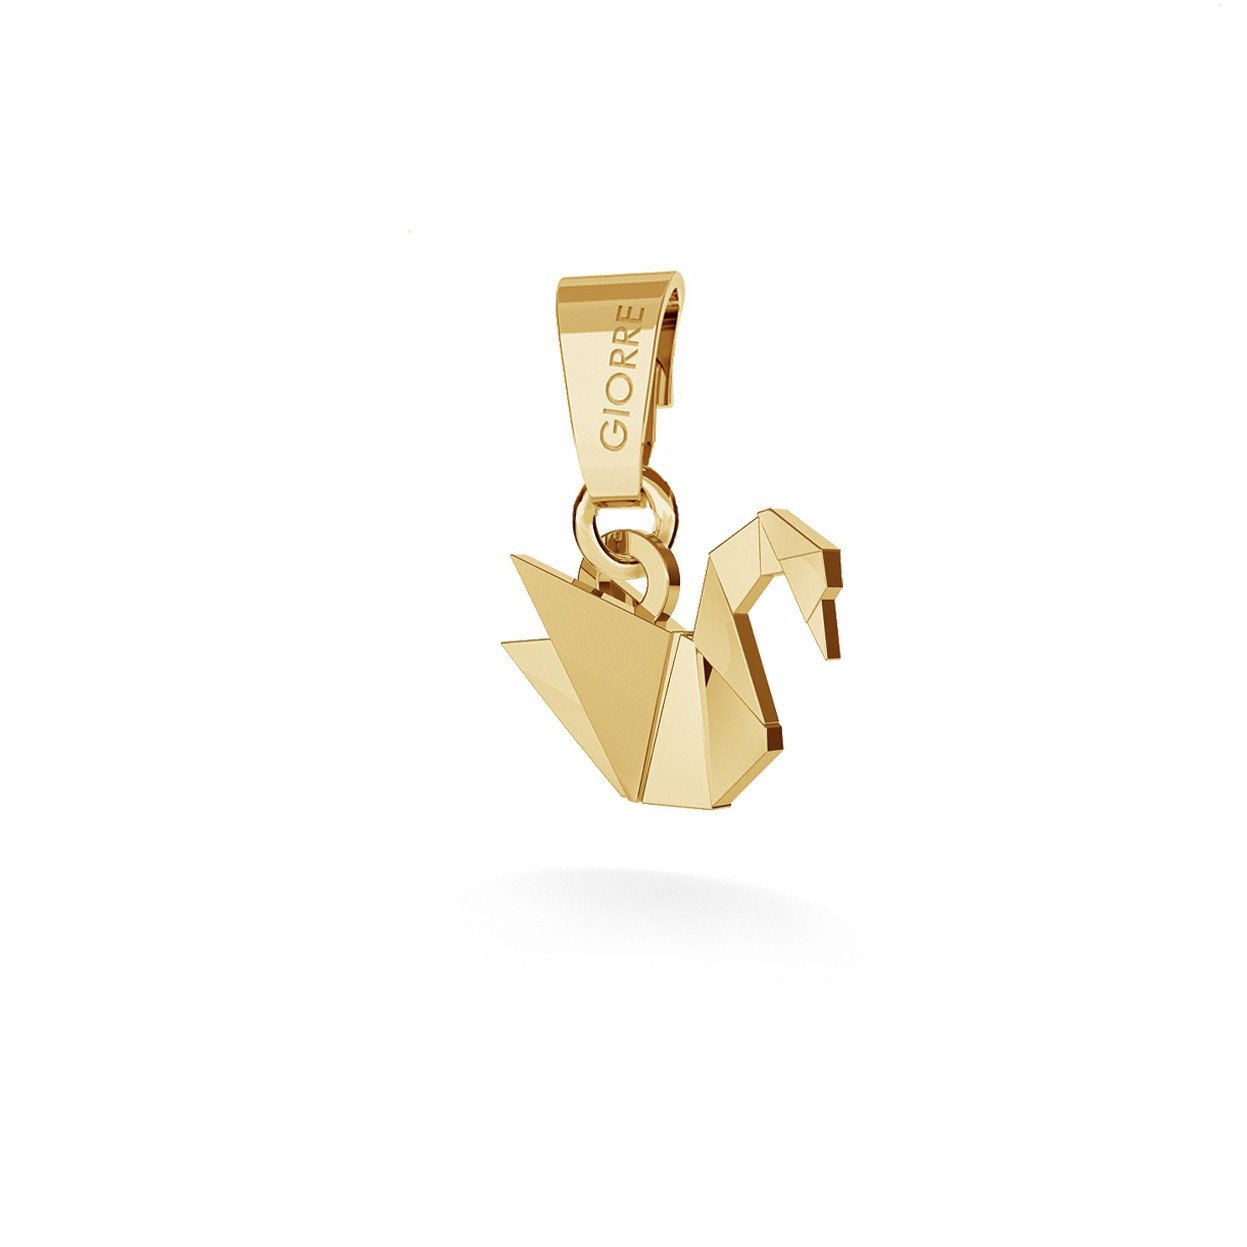 CHARM 38, ORIGAMI SWAN, SILVER 925,  RHODIUM OR GOLD PLATED